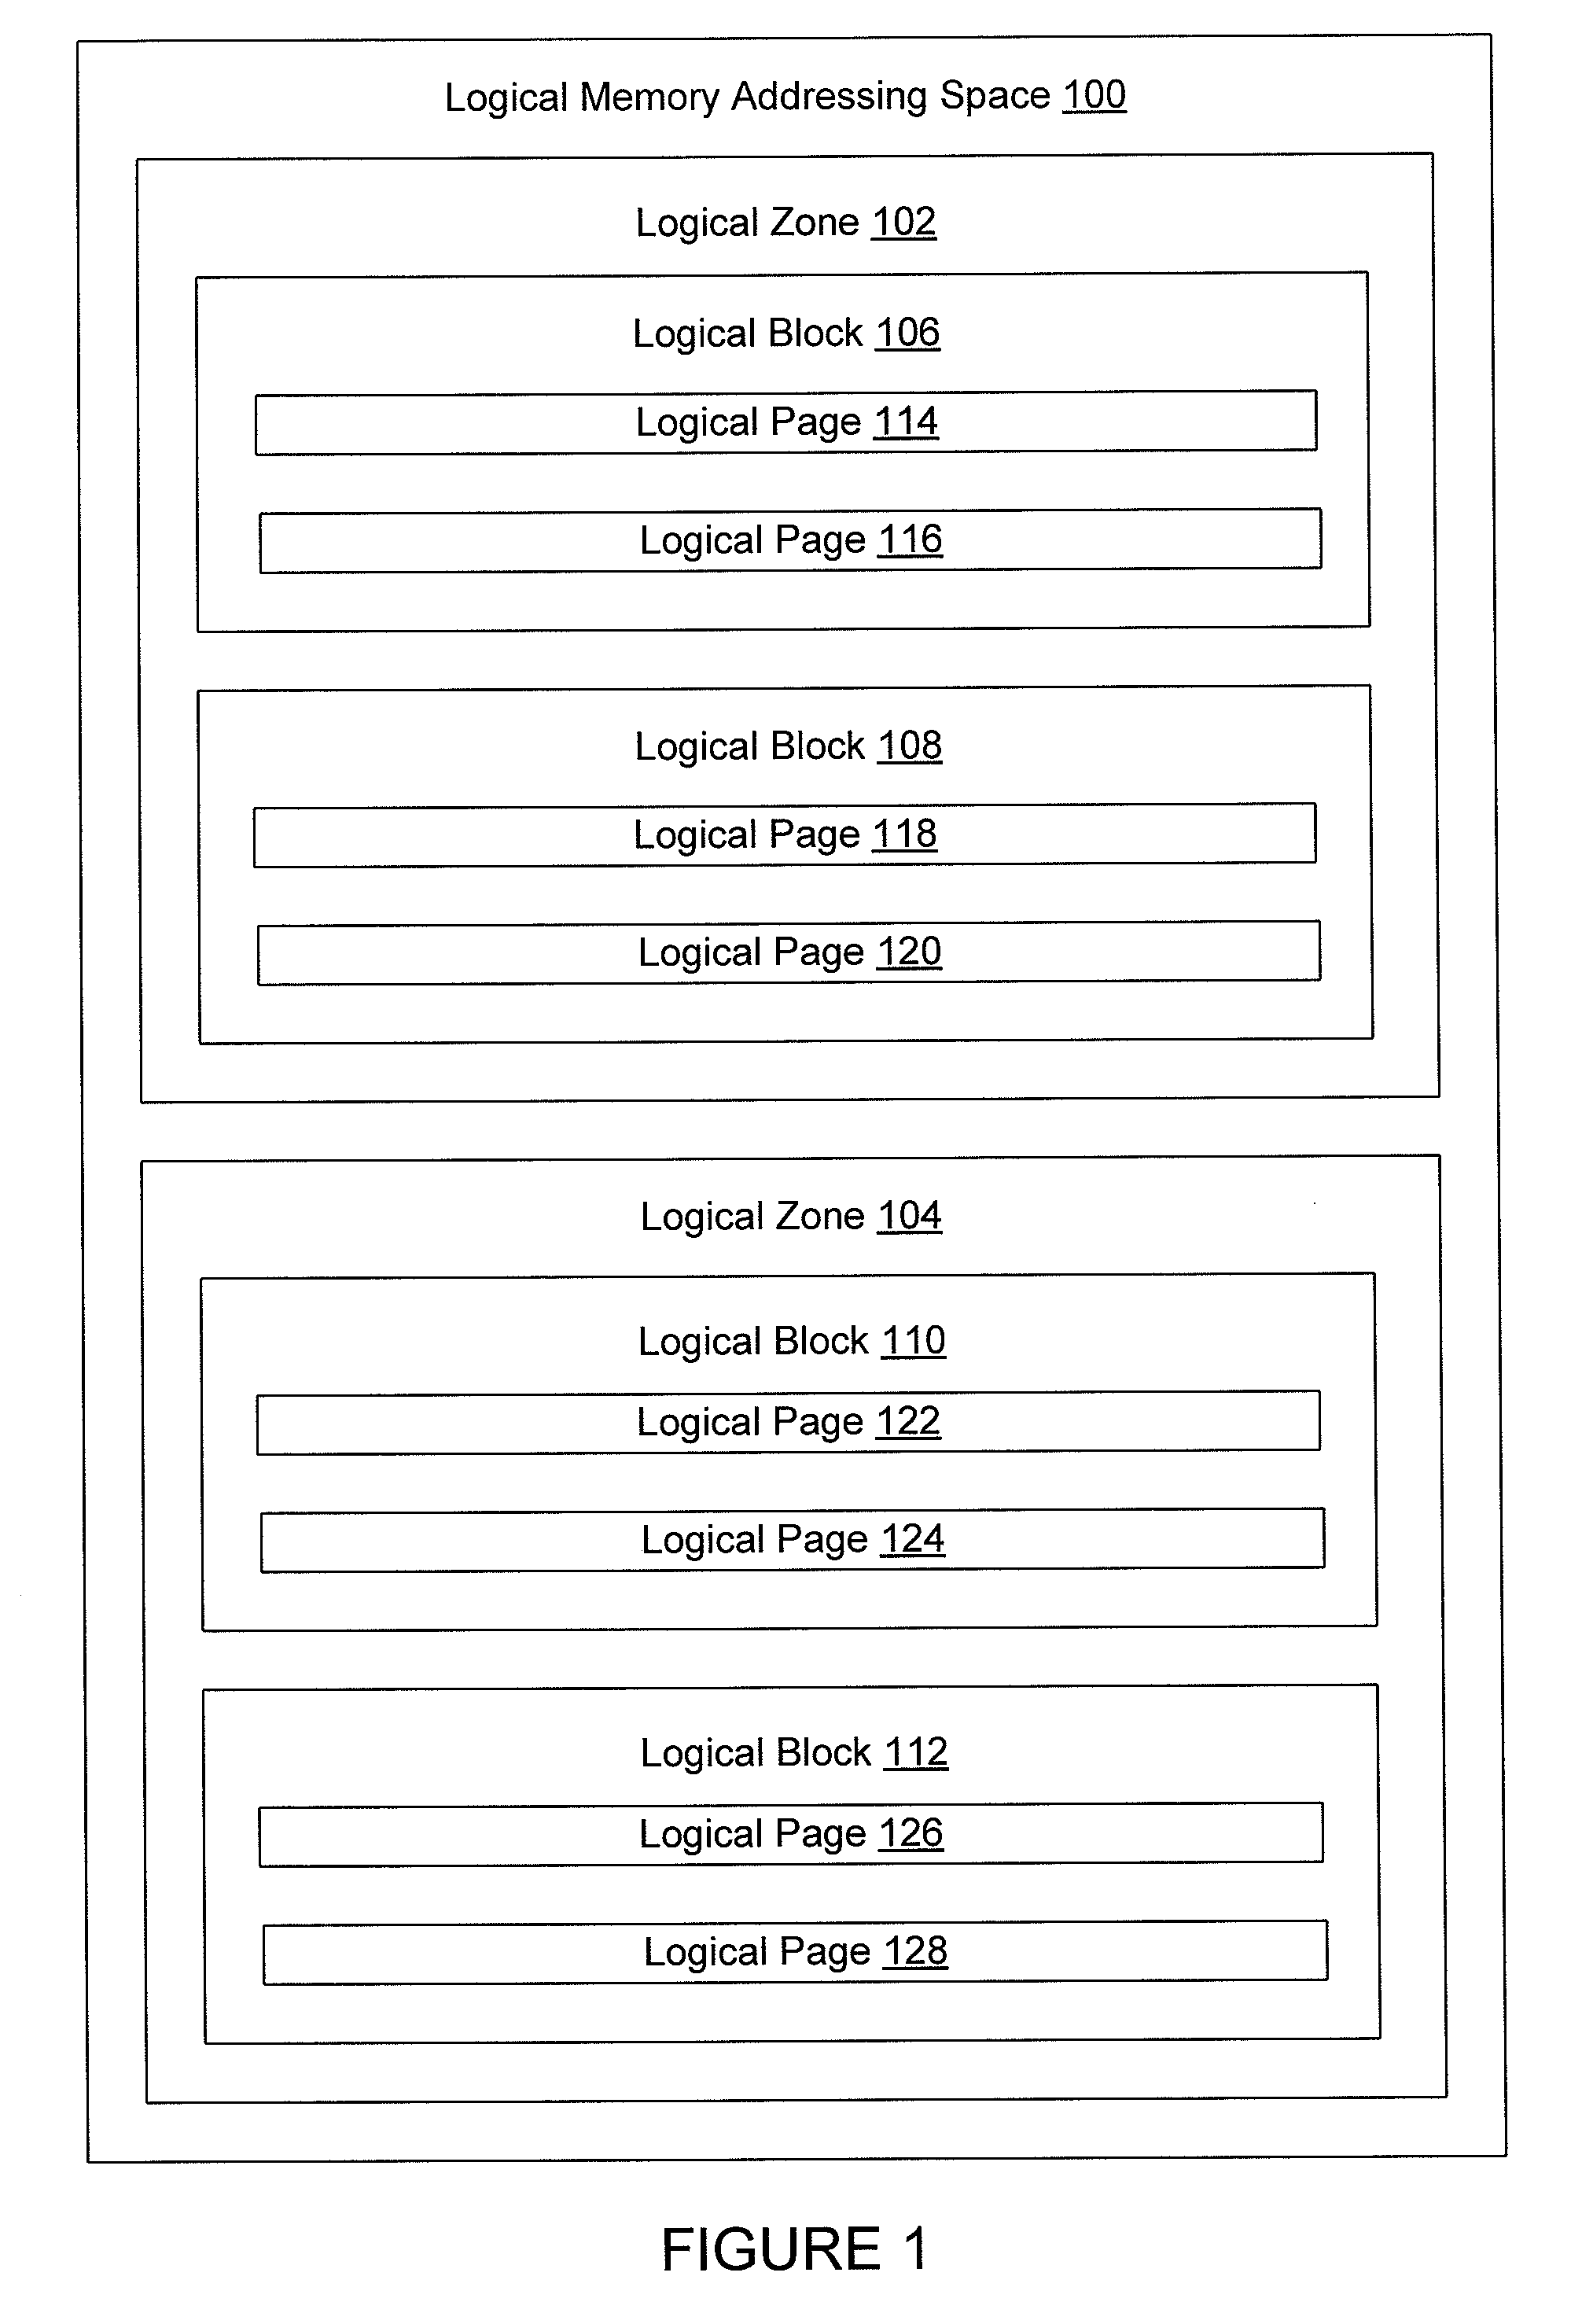 Logical-to-Physical Address Translation for a Removable Data Storage Device